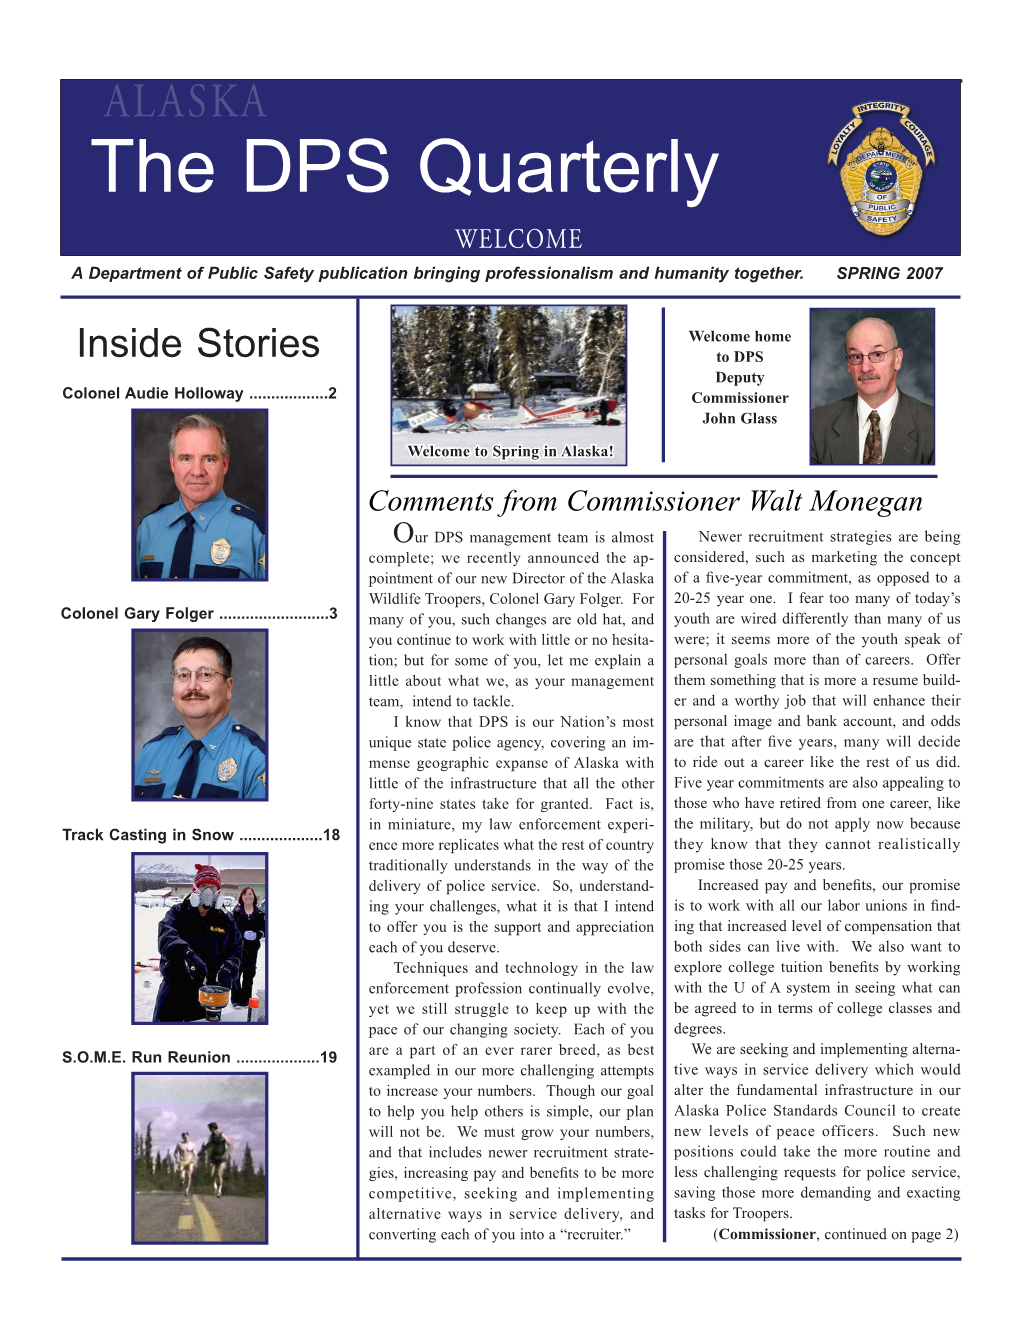 THE DPS QUARTERLY Alaska the DPS Quarterly Welcome a Department of Public Safety Publication Bringing Professionalism and Humanity Together